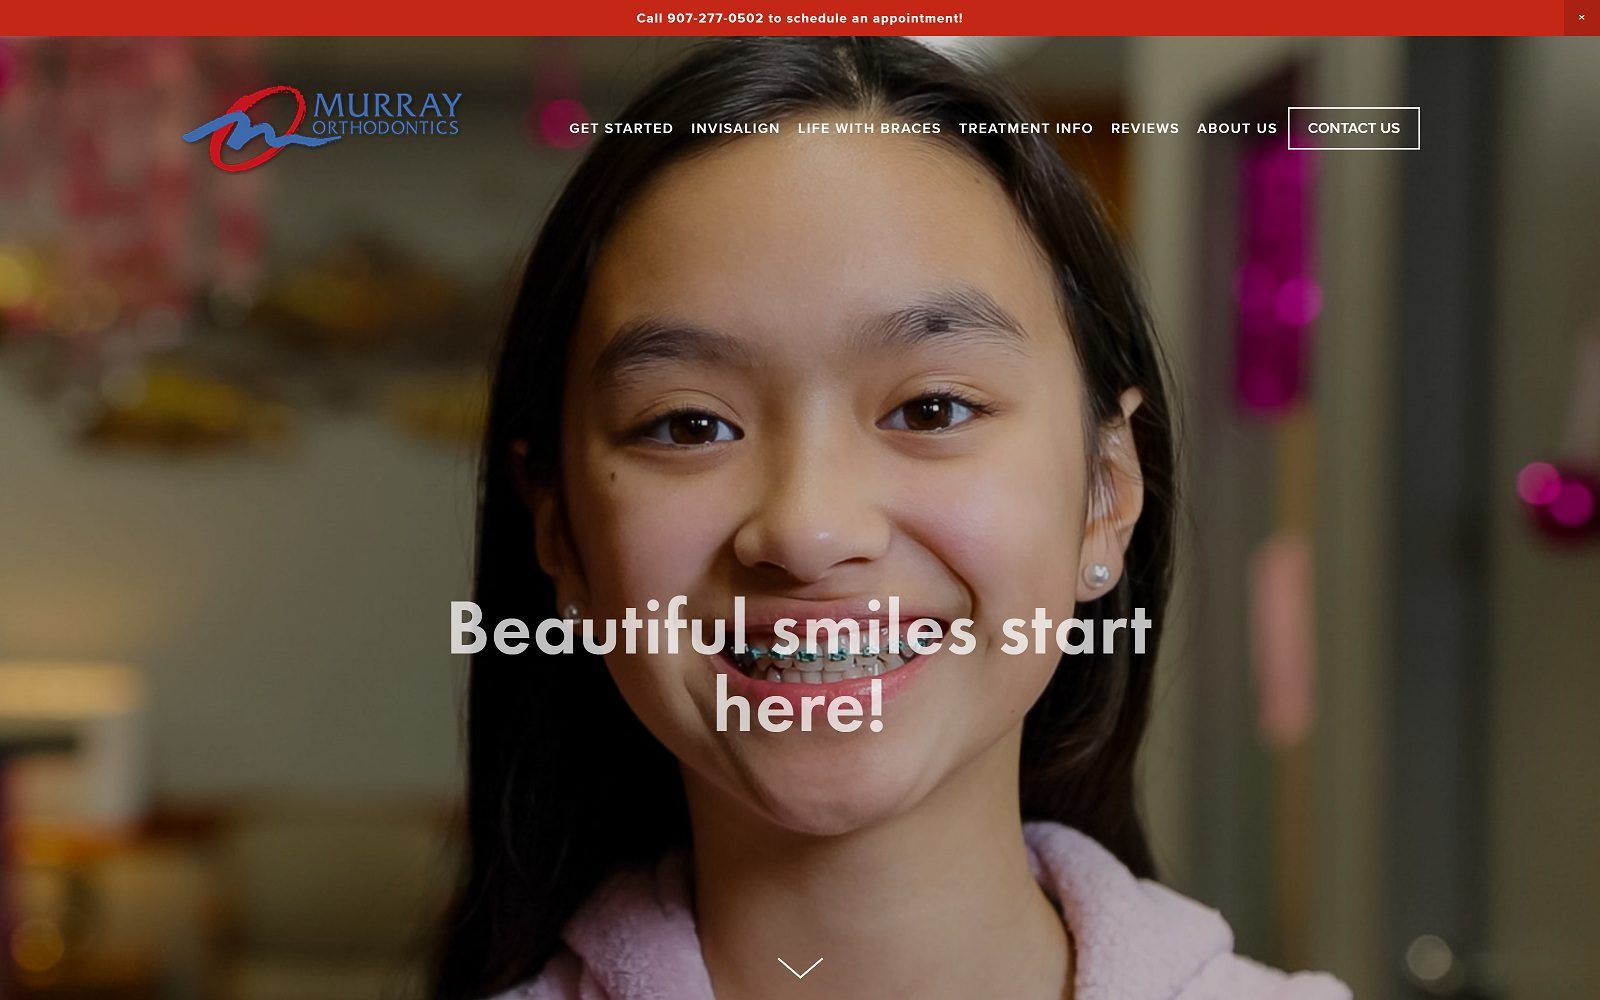 The screenshot of murray orthodontics - south anchorage dr. John murray website